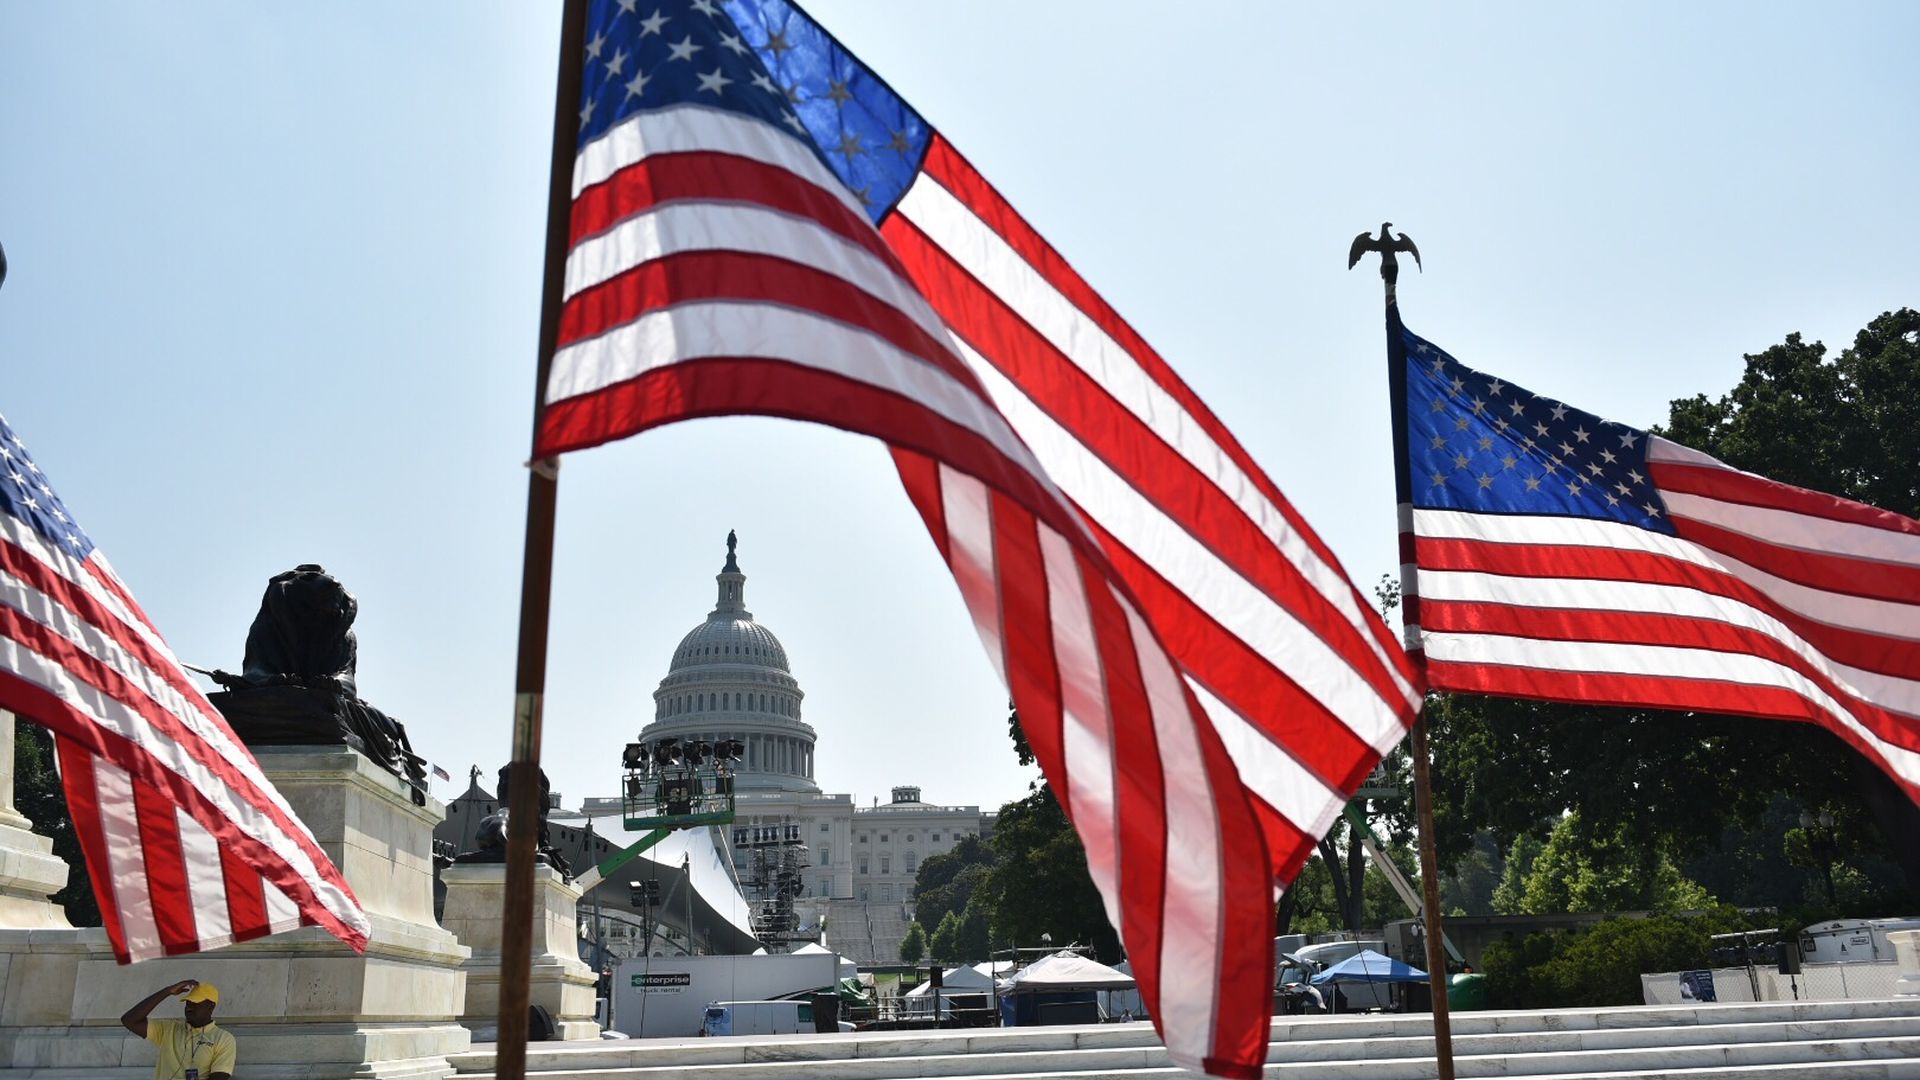 U.S. flags fly in front of the Capitol building.